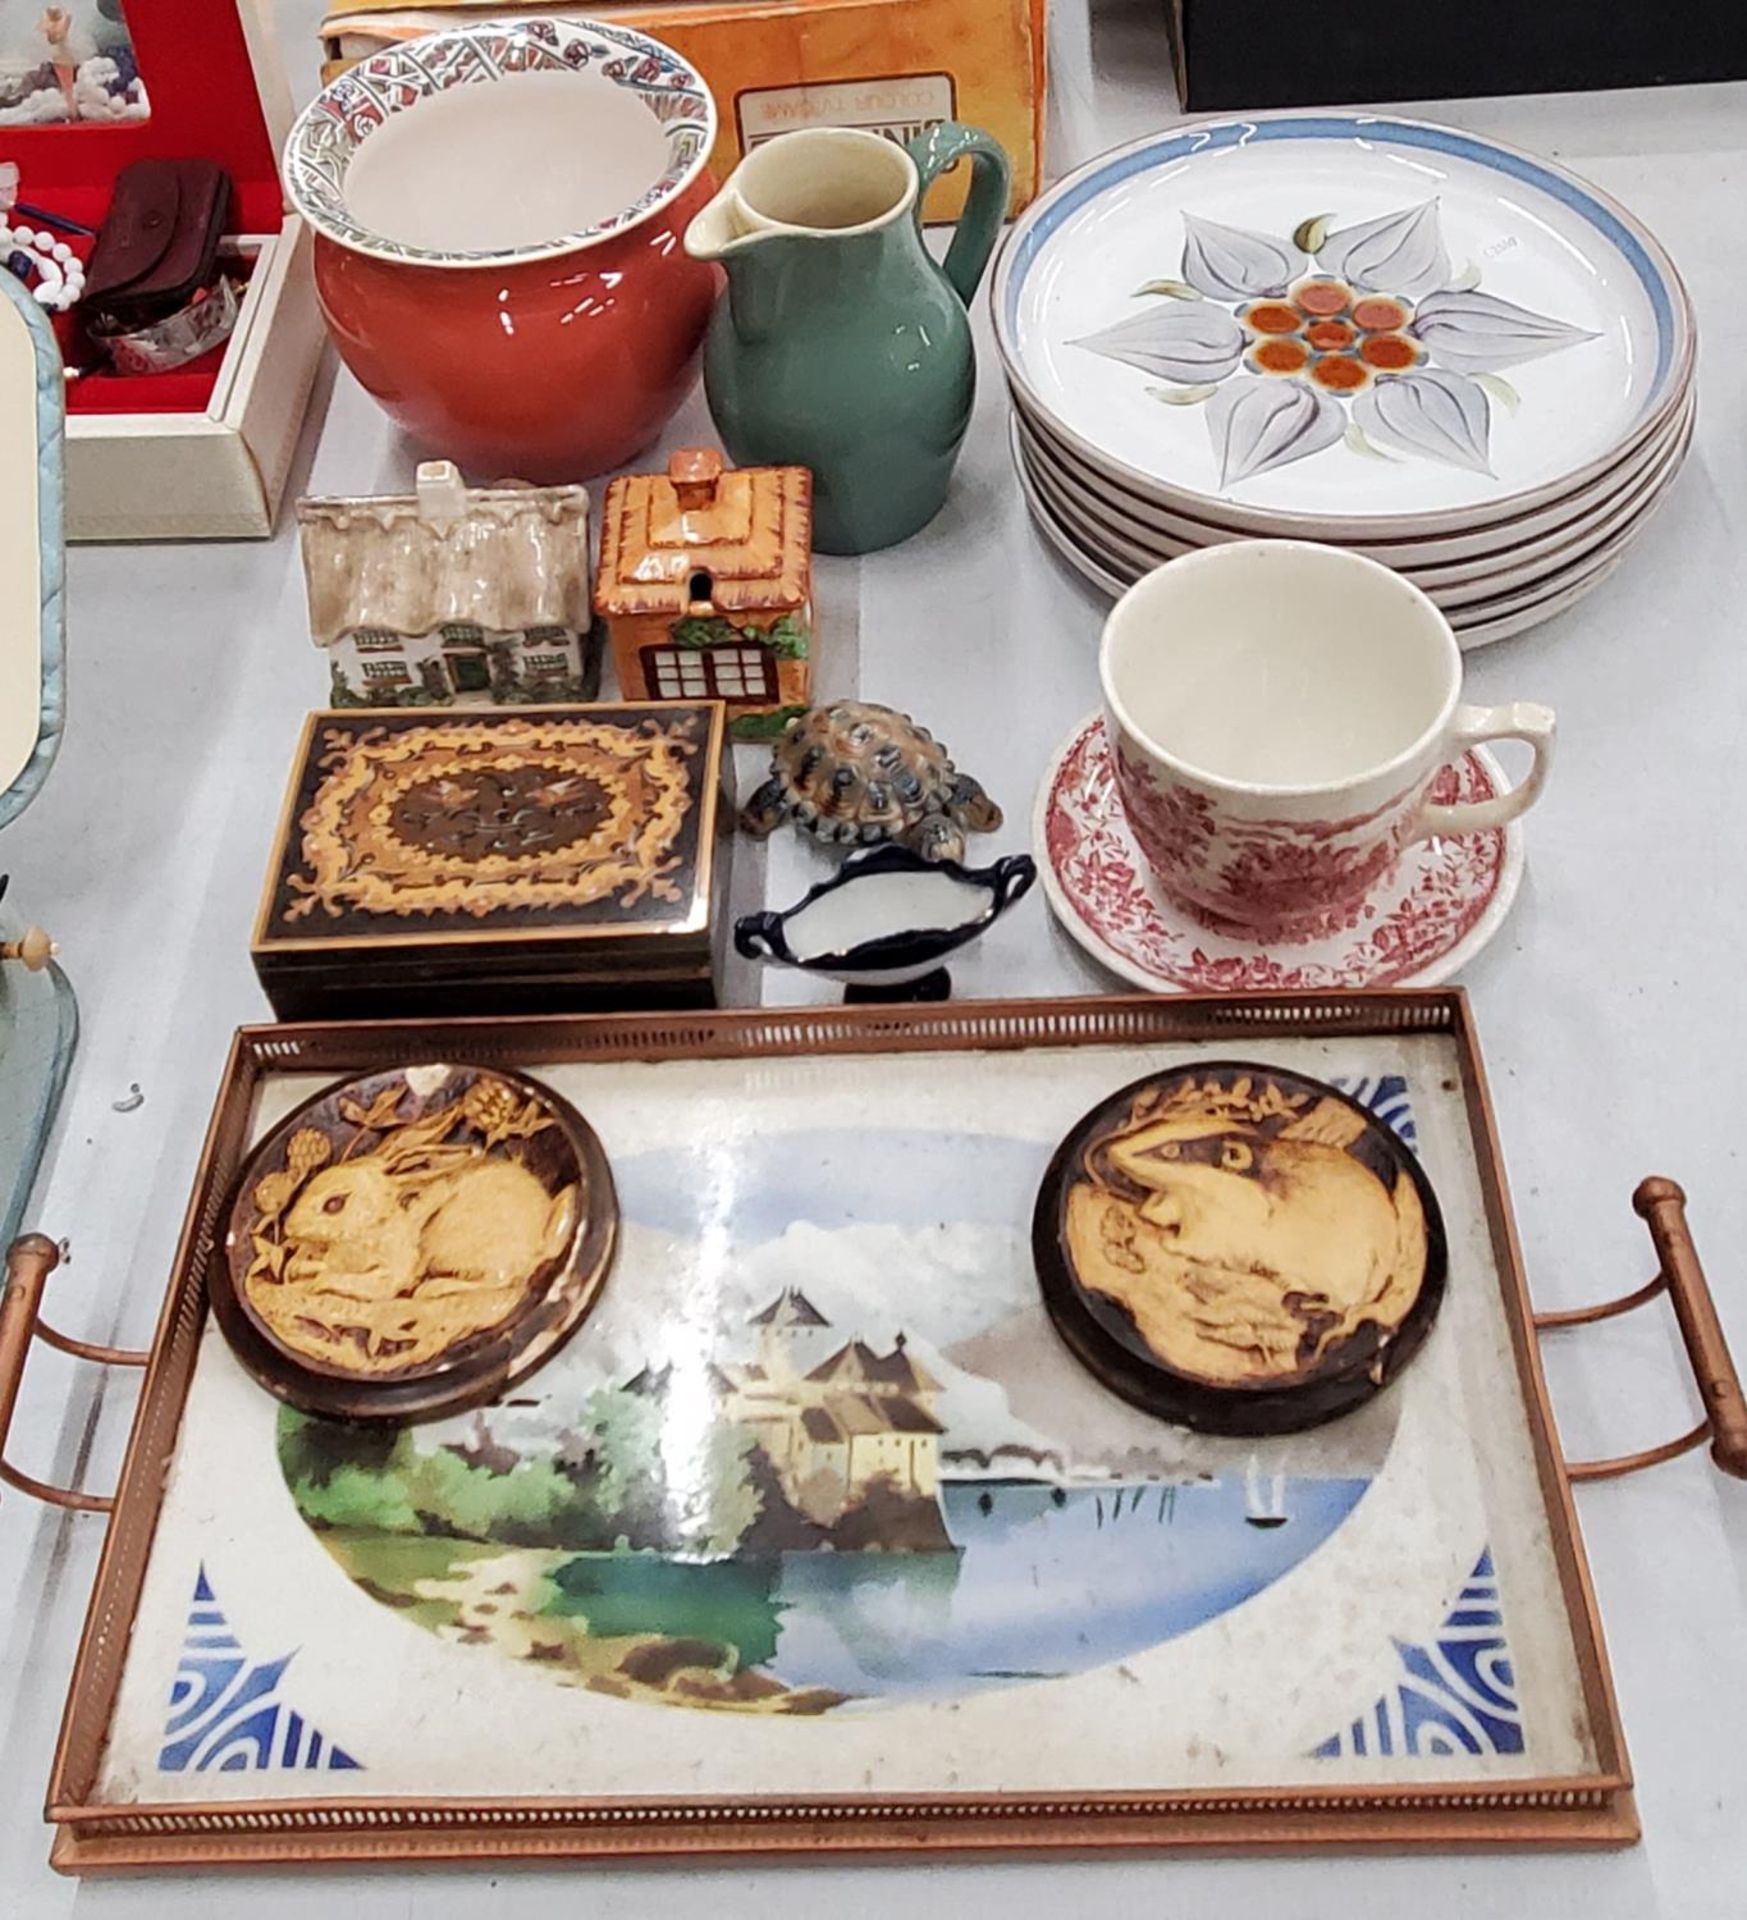 A QUANTITY OF DENBY 'CHATSWORTH' PLATES AND JUG, COTTAGE WARE, A VINTAGE GALLERIED TRAY, A LARGE